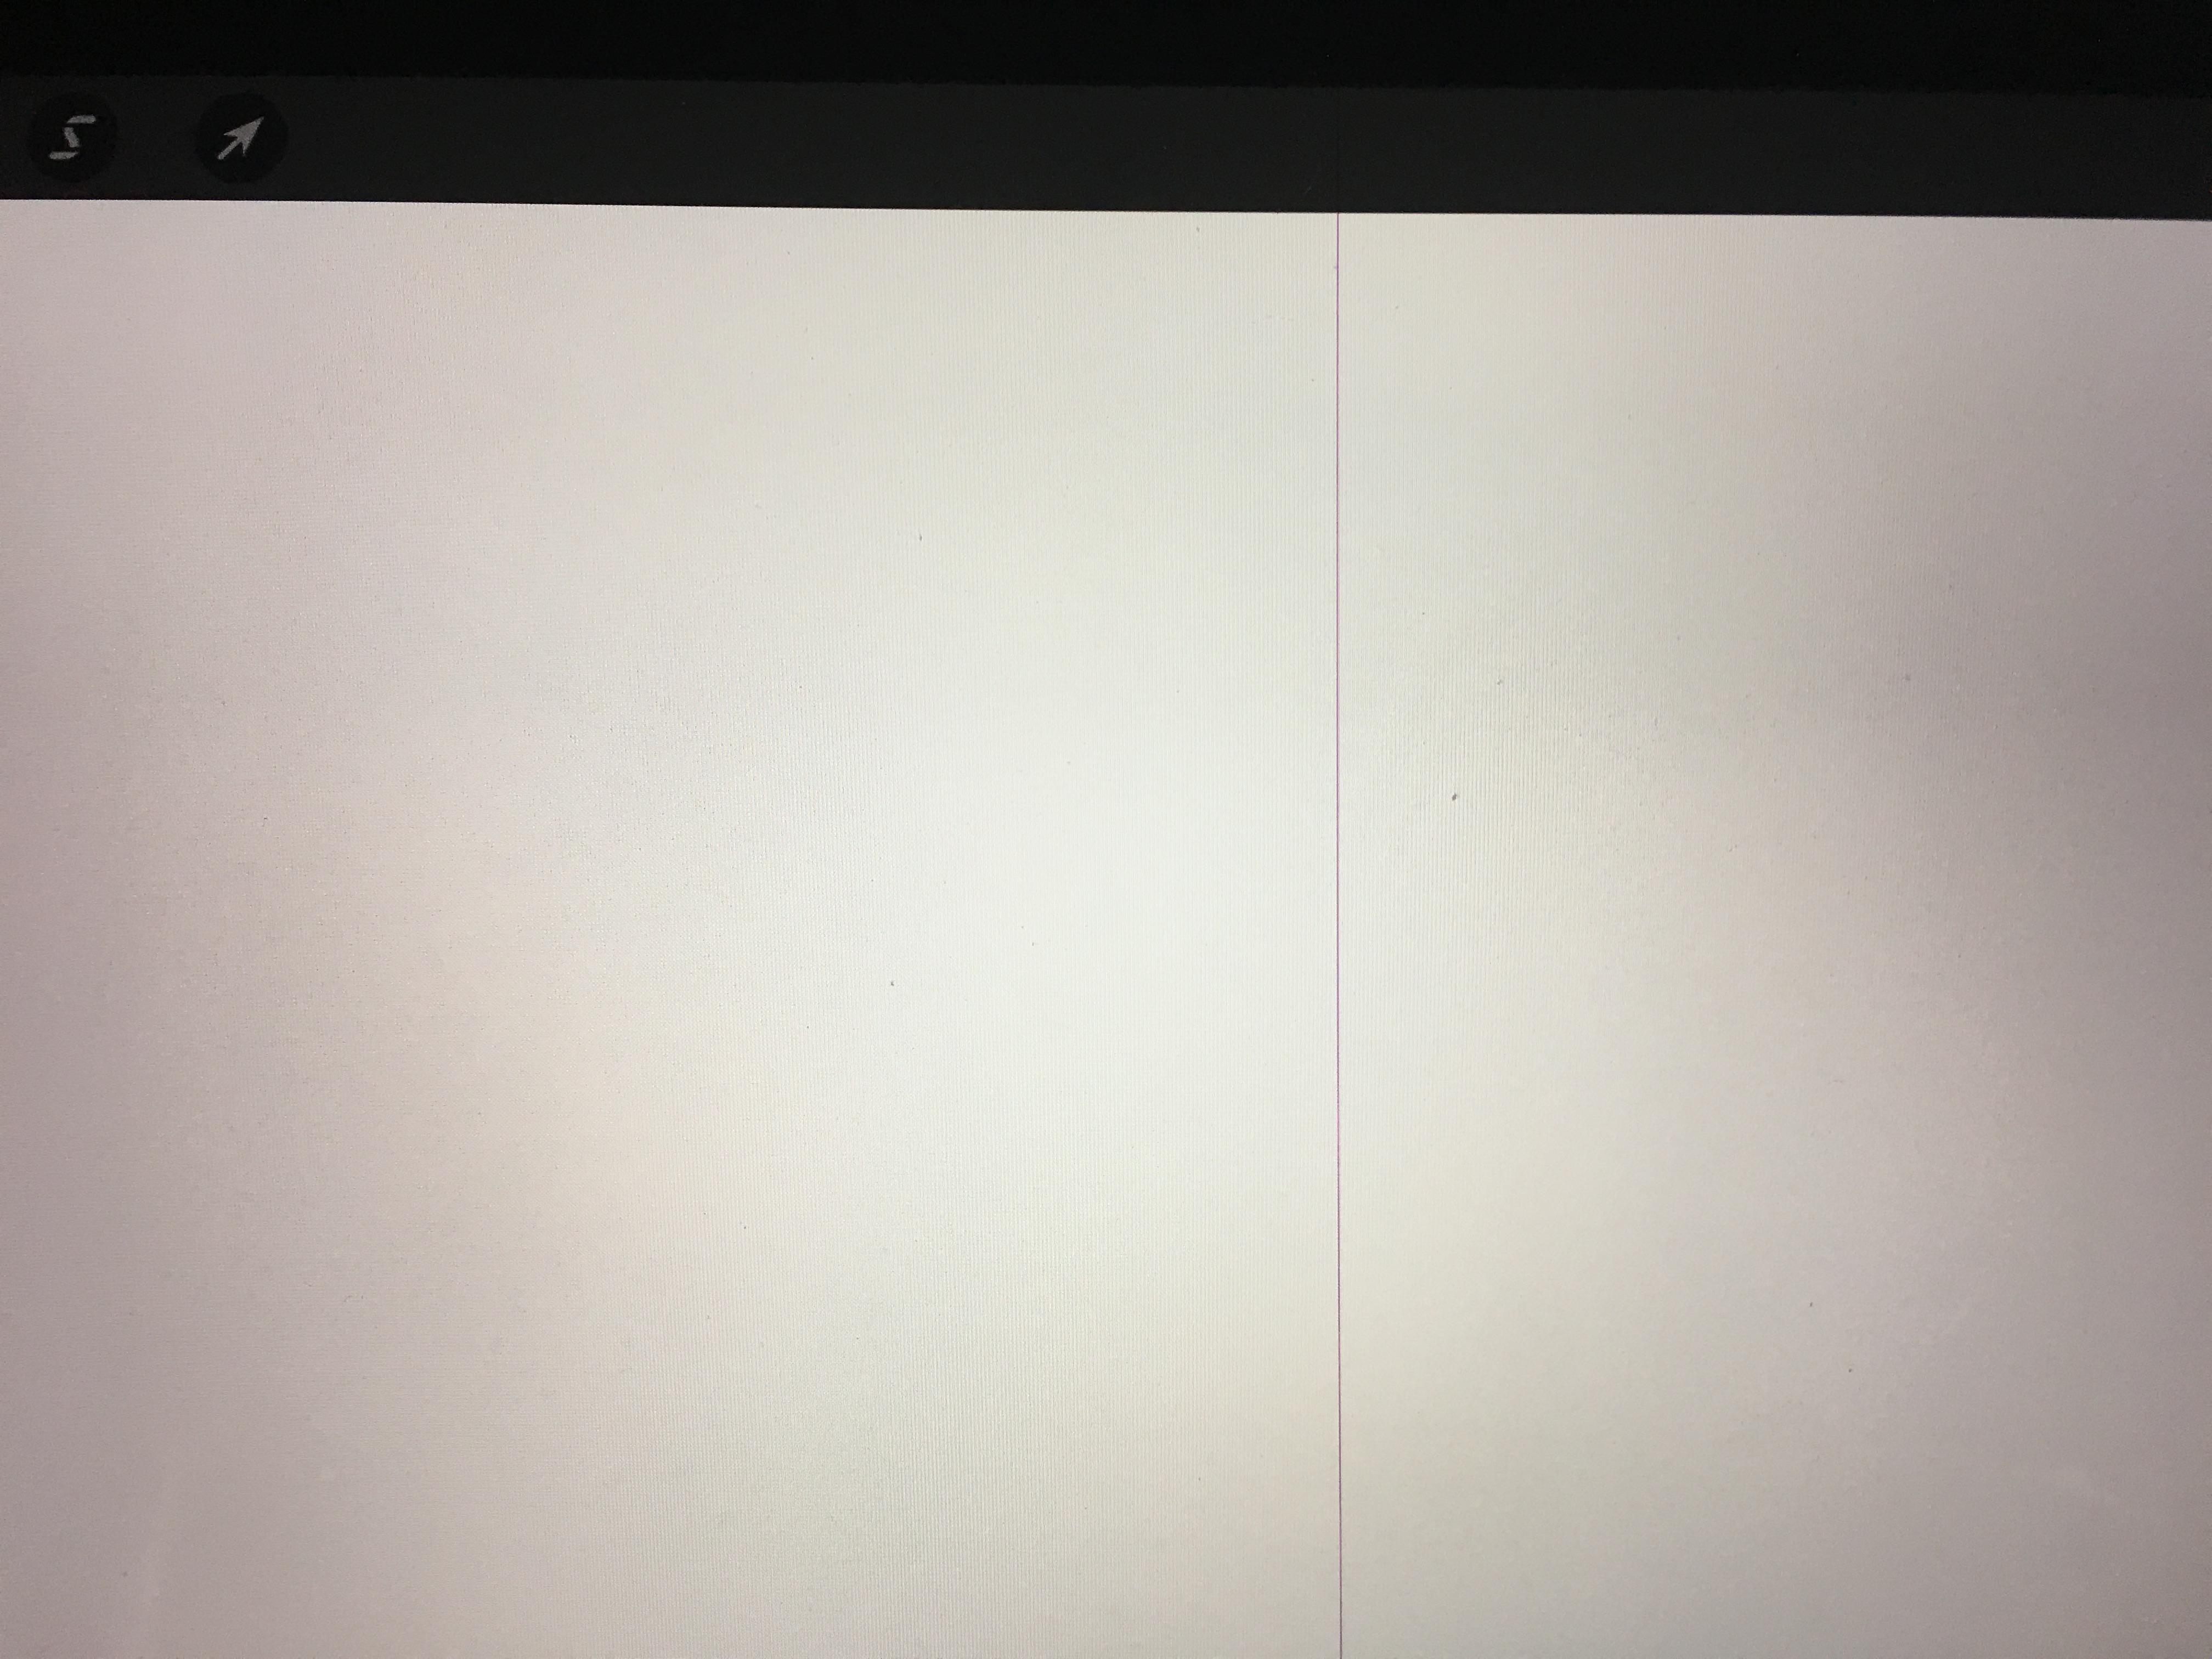 Horizontal Red Lines On Monitor